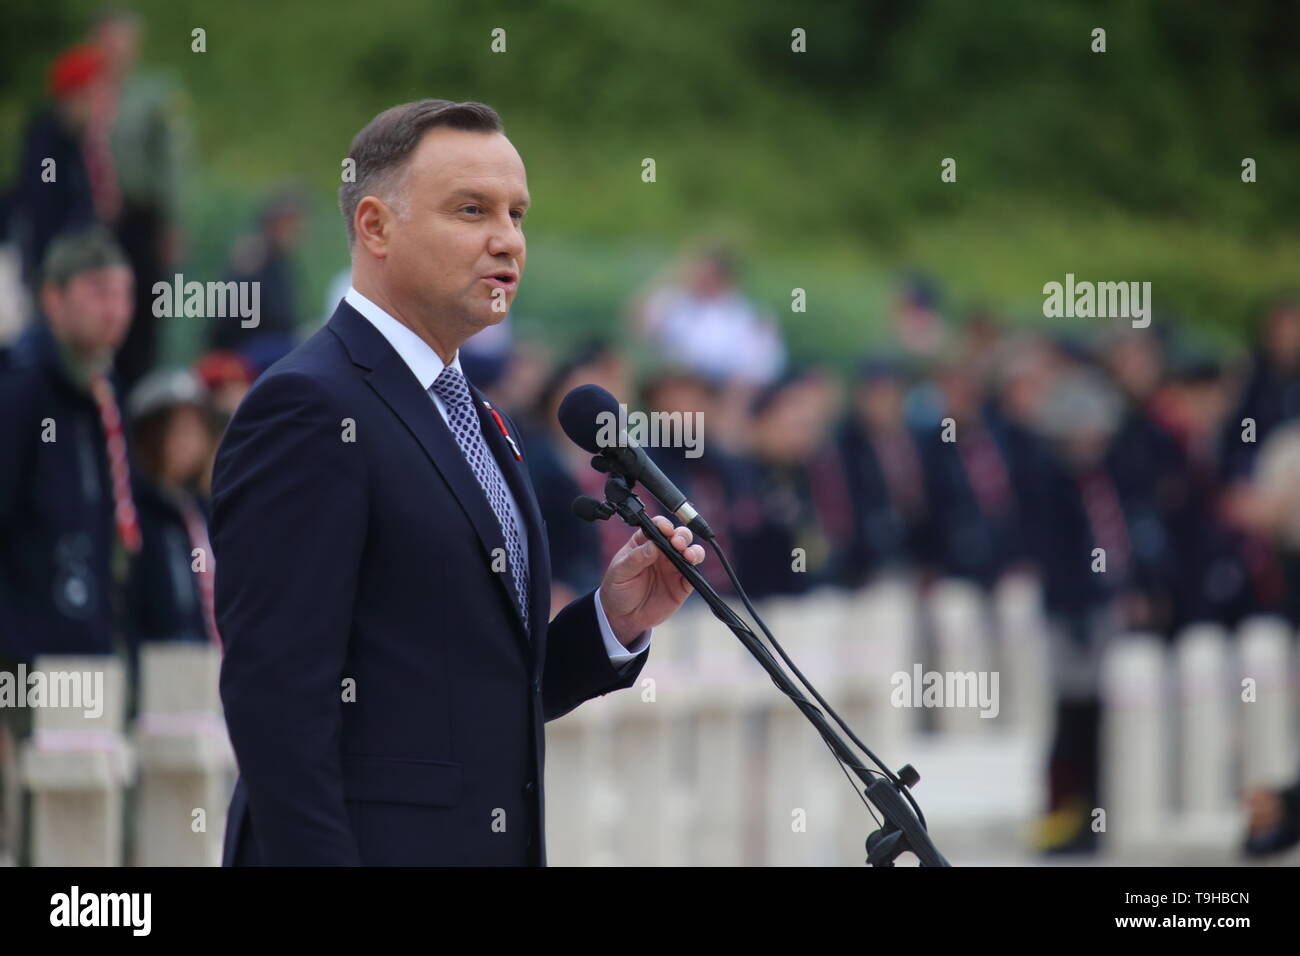 Cassino, Italy - May 18, 2019: The speech of the President of the Republic of Poland Andrzej Duda in the Polish military cemetery for the 75th anniversary of the Battle of Montecassino Stock Photo